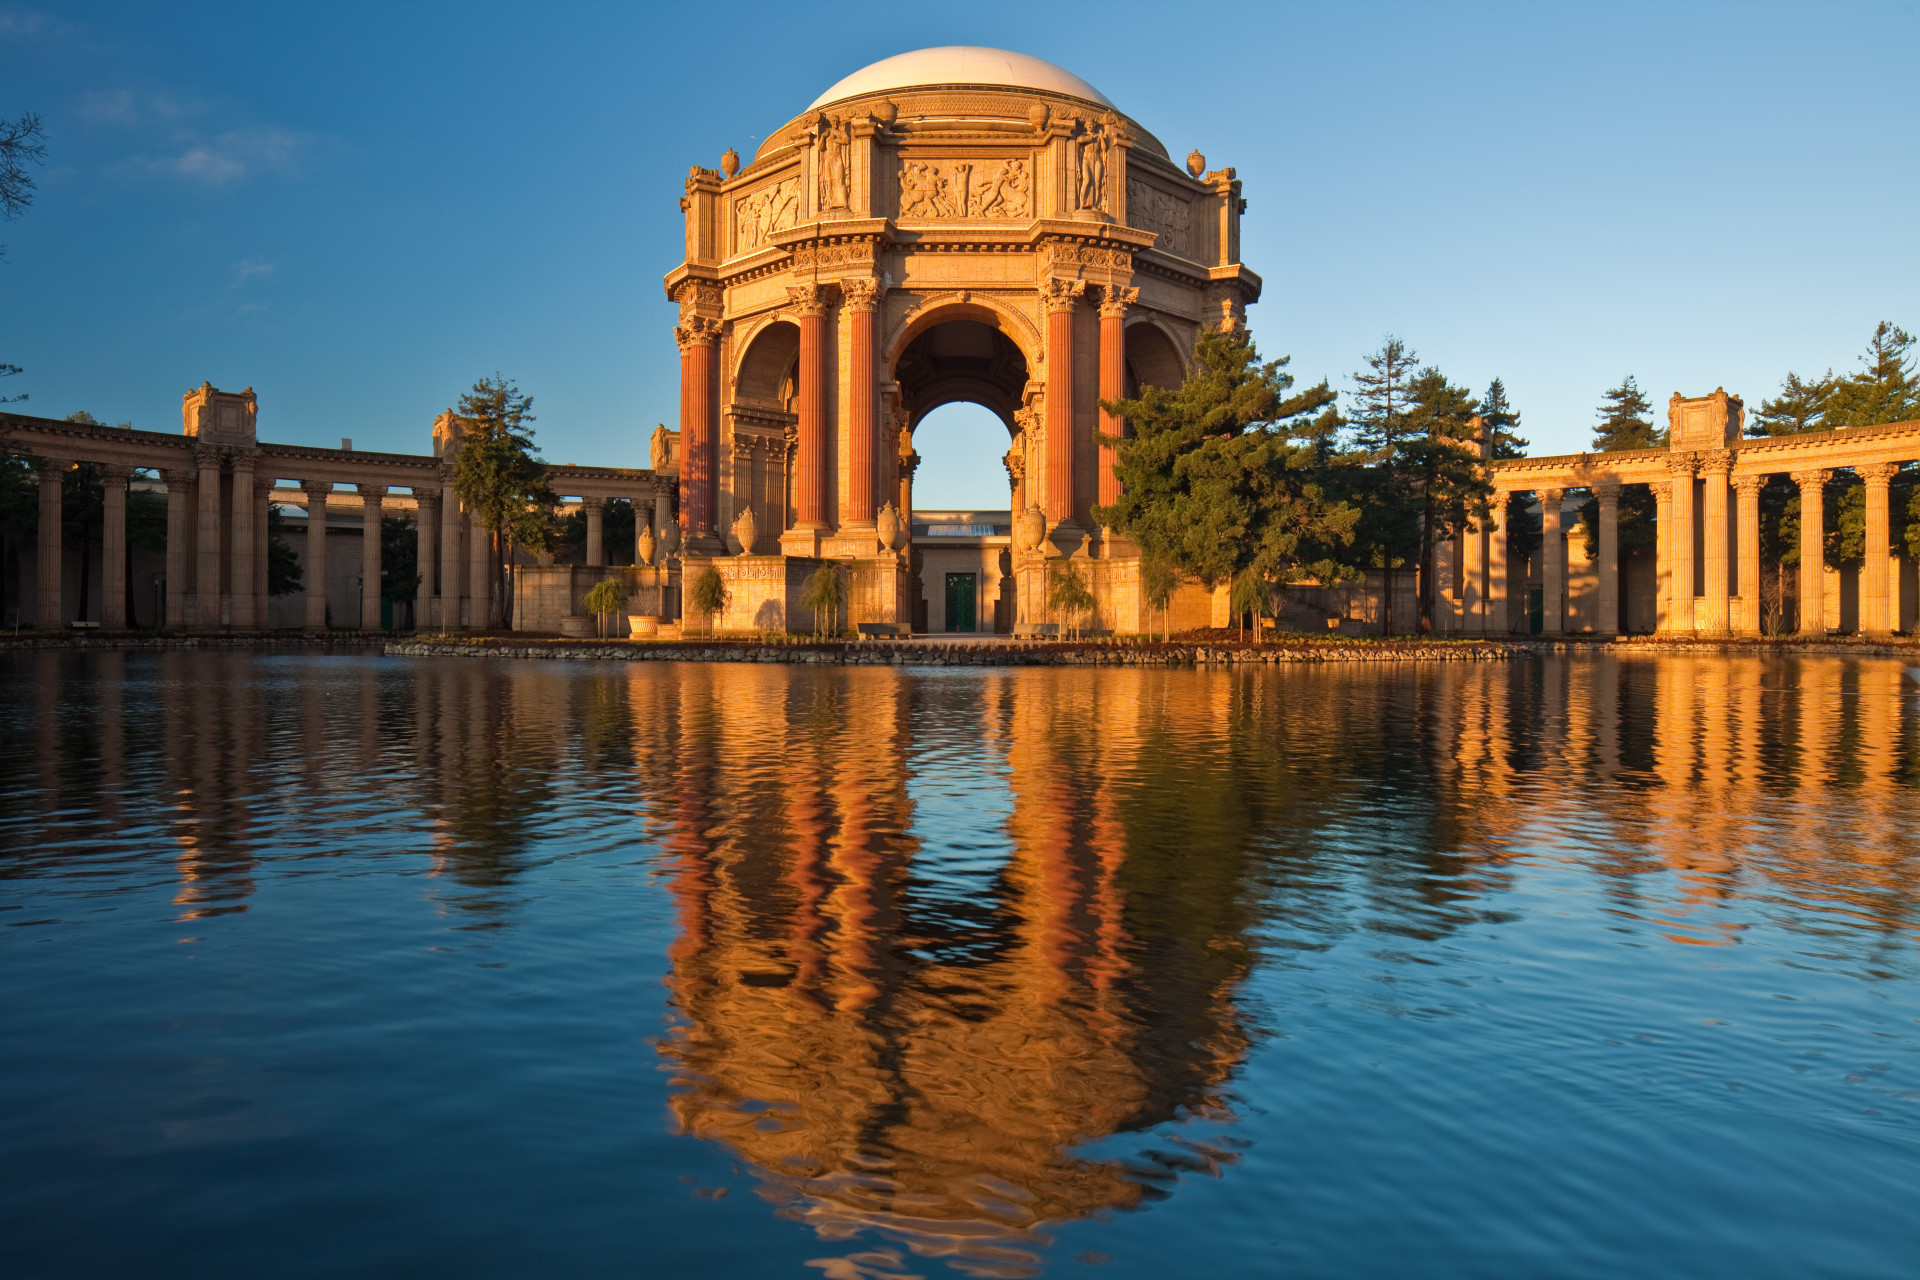 Explore the Palace of Fine Arts! You will be transported back in time while walking around the regal grounds of this beautiful SF exhibit.<p><a href="https://www.msn.com/en-us/community/channel/vid-7xx8mnucu55yw63we9va2gwr7uihbxwc68fxqp25x6tg4ftibpra?cvid=94631541bc0f4f89bfd59158d696ad7e">Follow us and access great exclusive content every day</a></p>